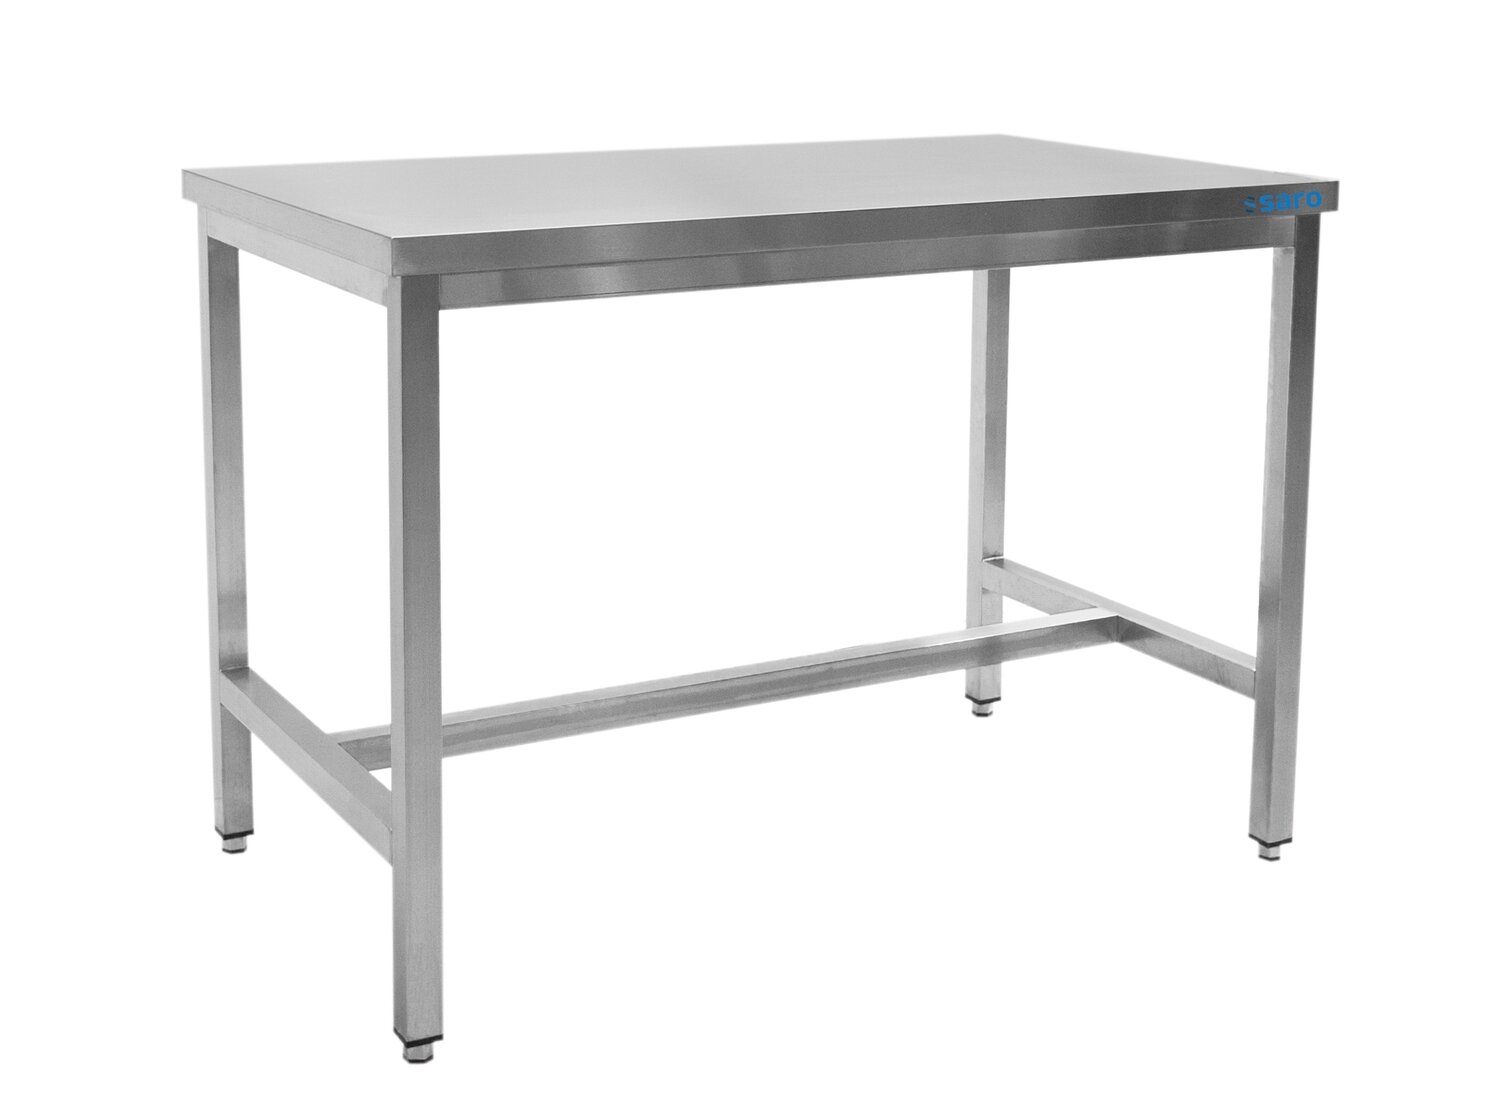 SARO Stainless steel table, without under shelf - 600 mm depth, 1200mm